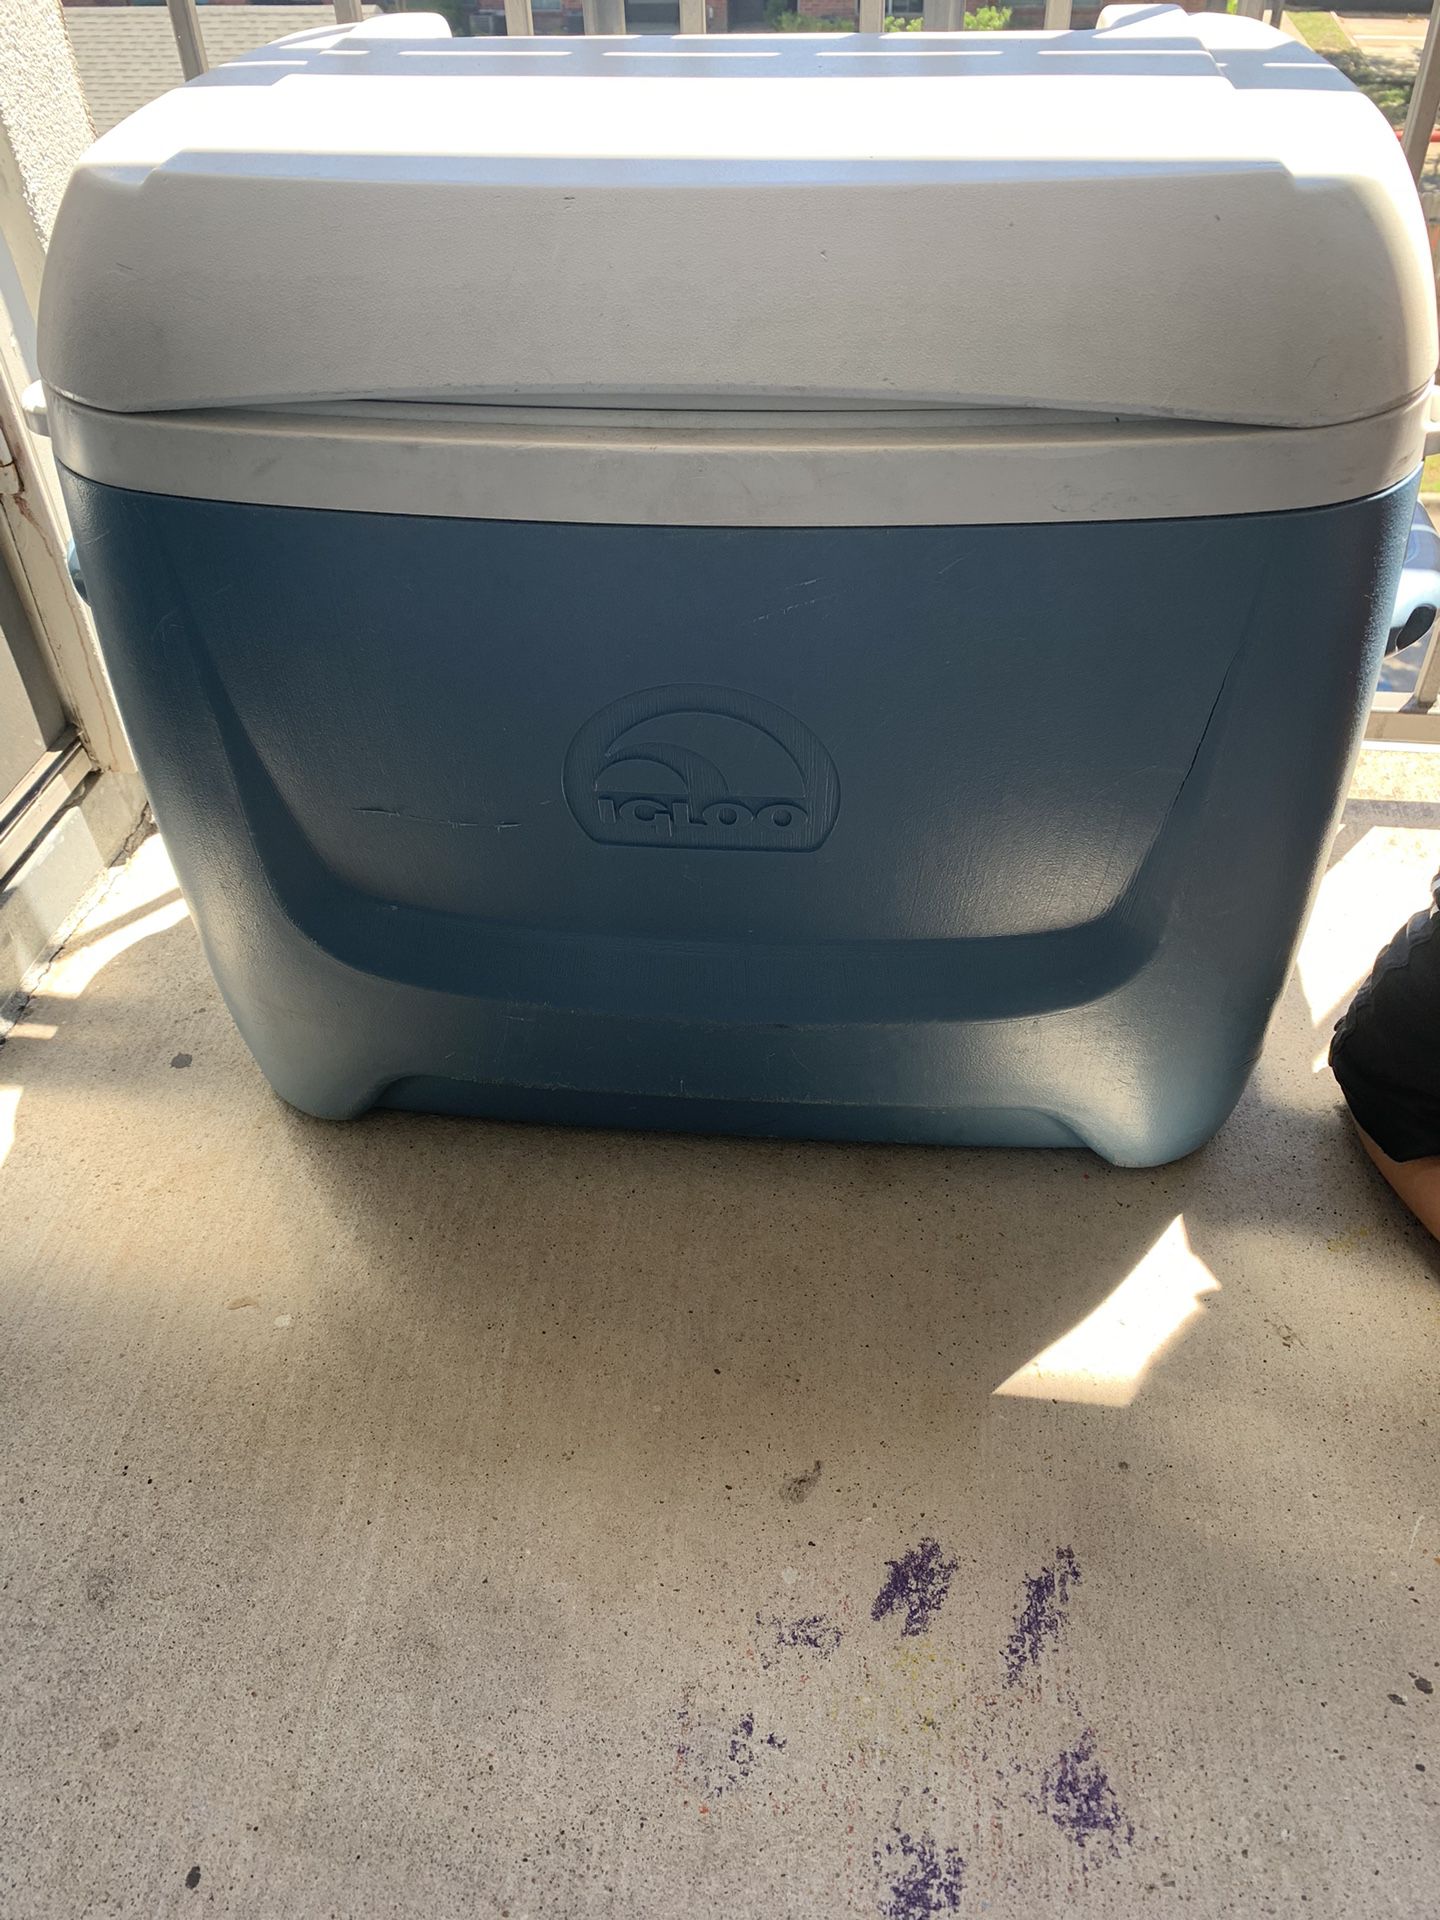 Igloo Cooler Used But No Damages